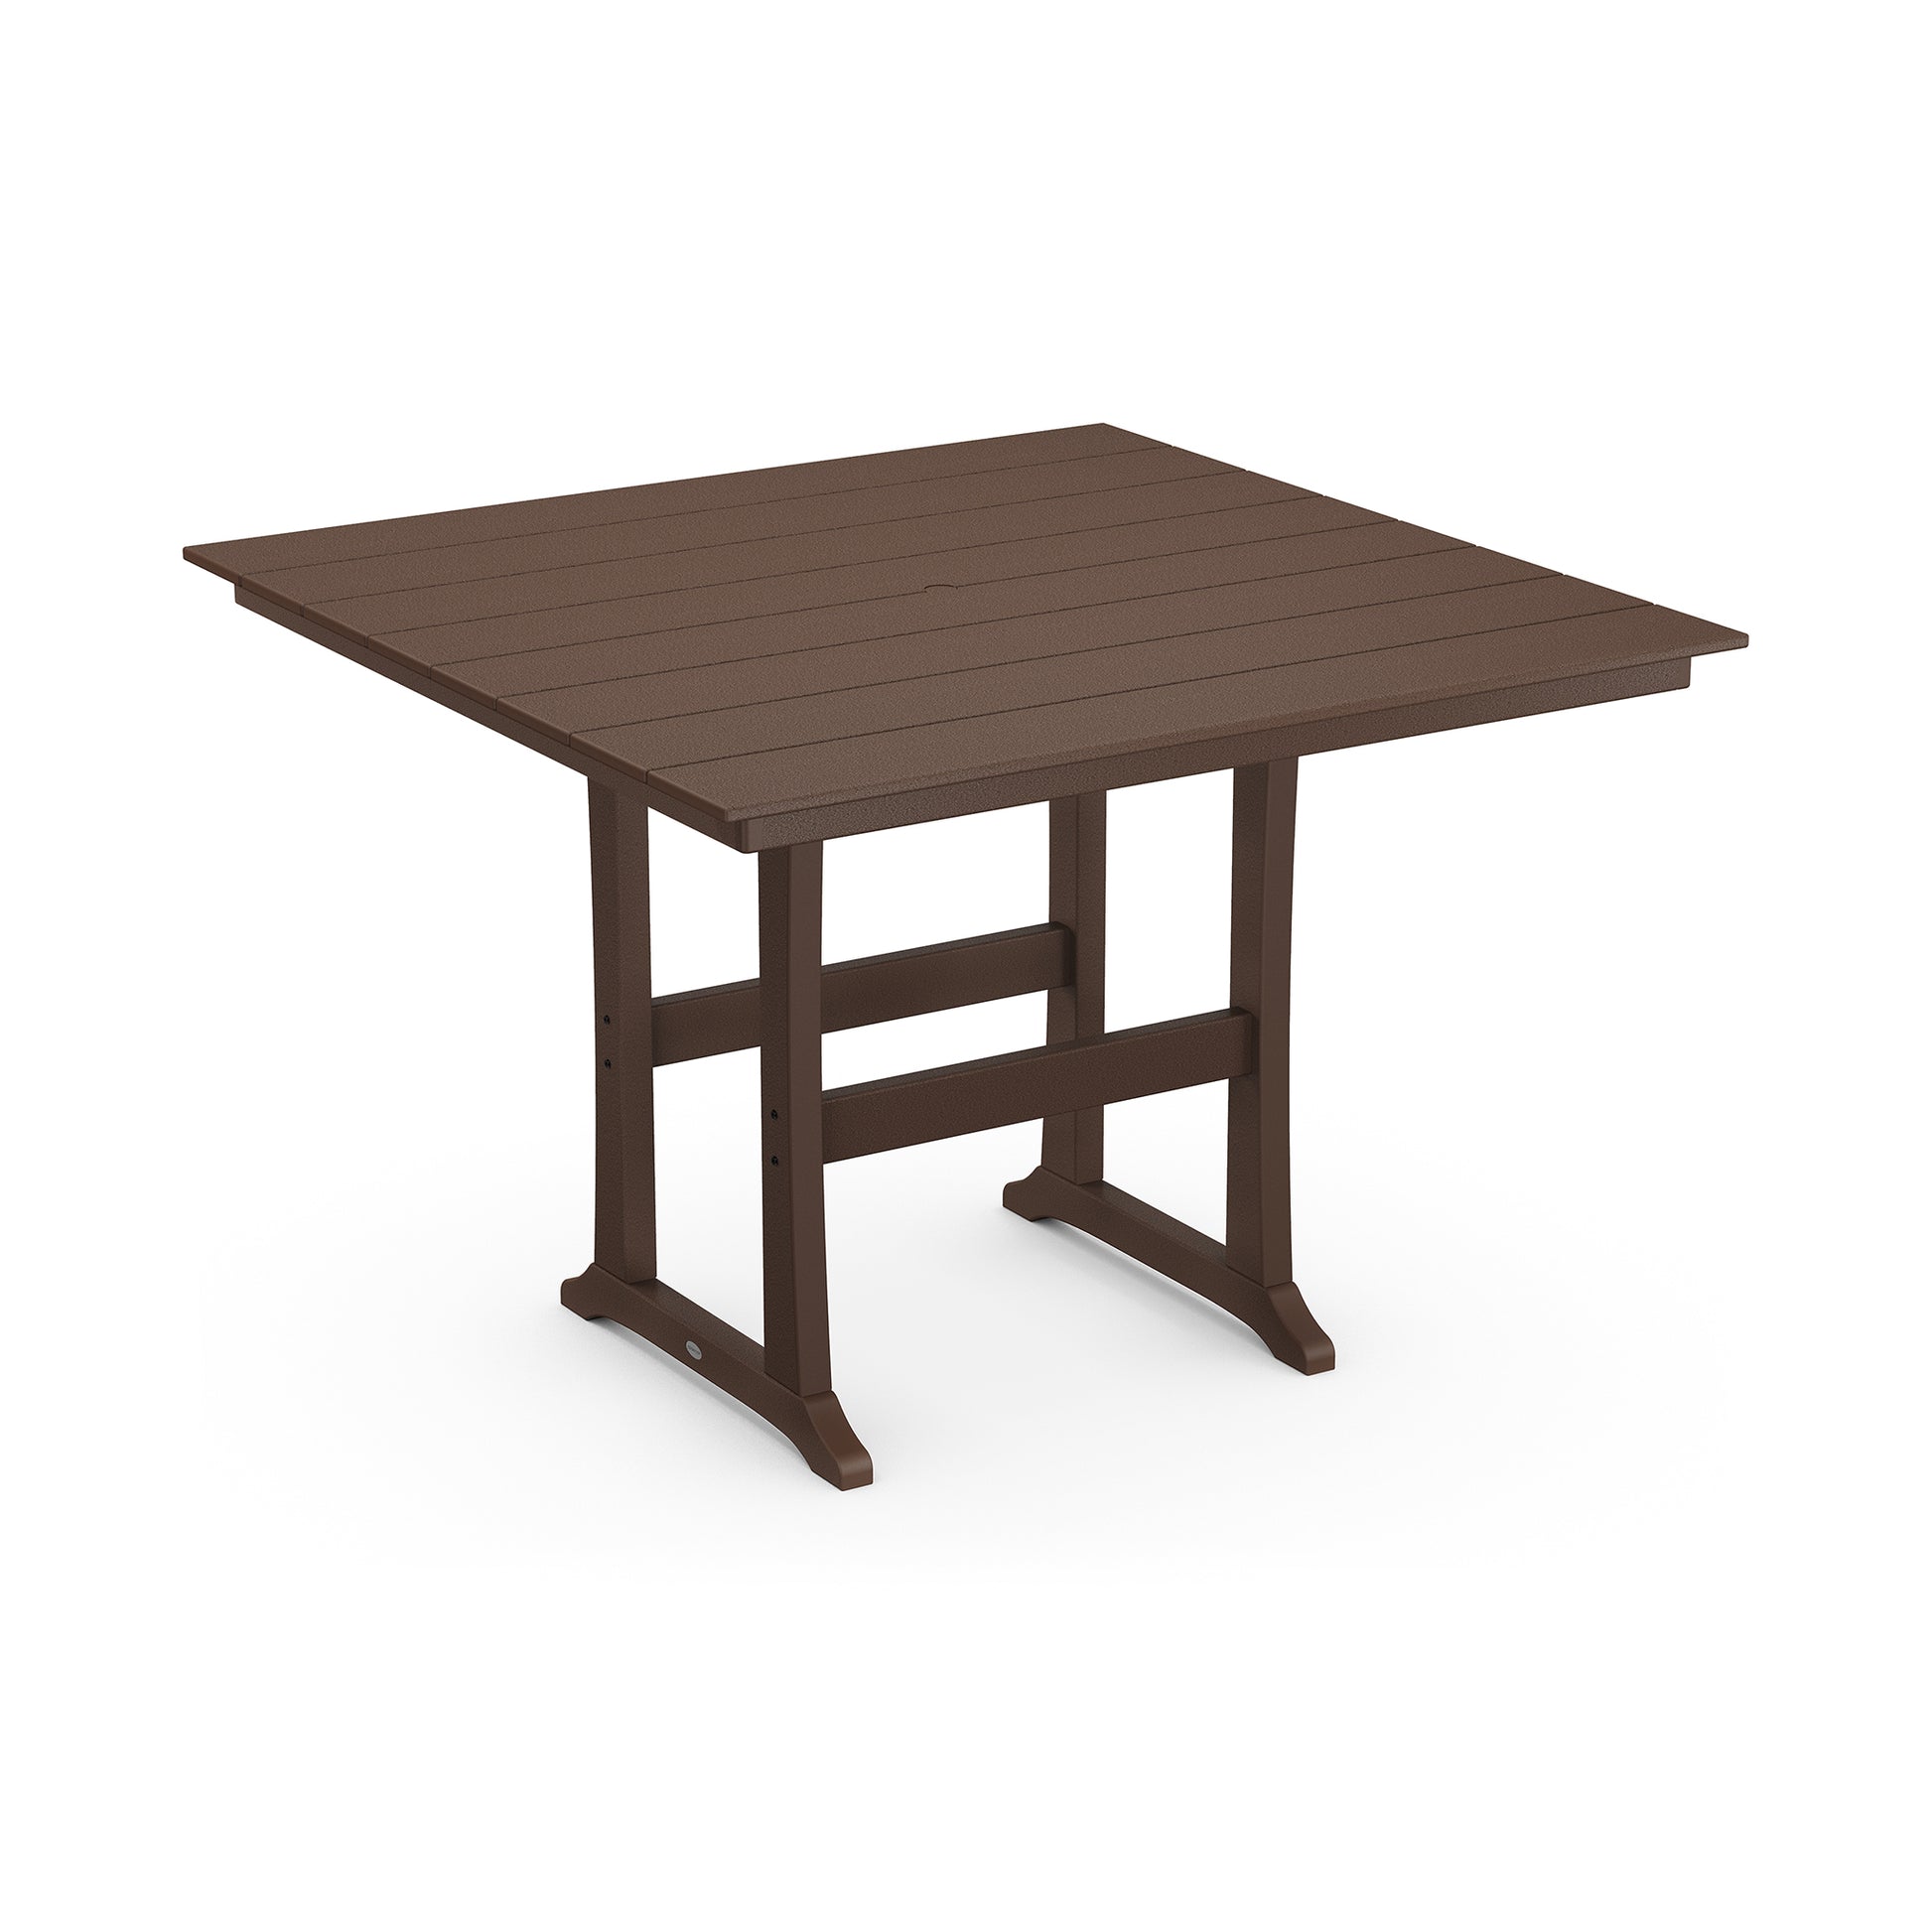 A 3D rendering of a POLYWOOD Farmhouse Trestle 59" Bar Table made of POLYWOOD lumber, with a slatted top and sturdy legs, isolated on a white background.